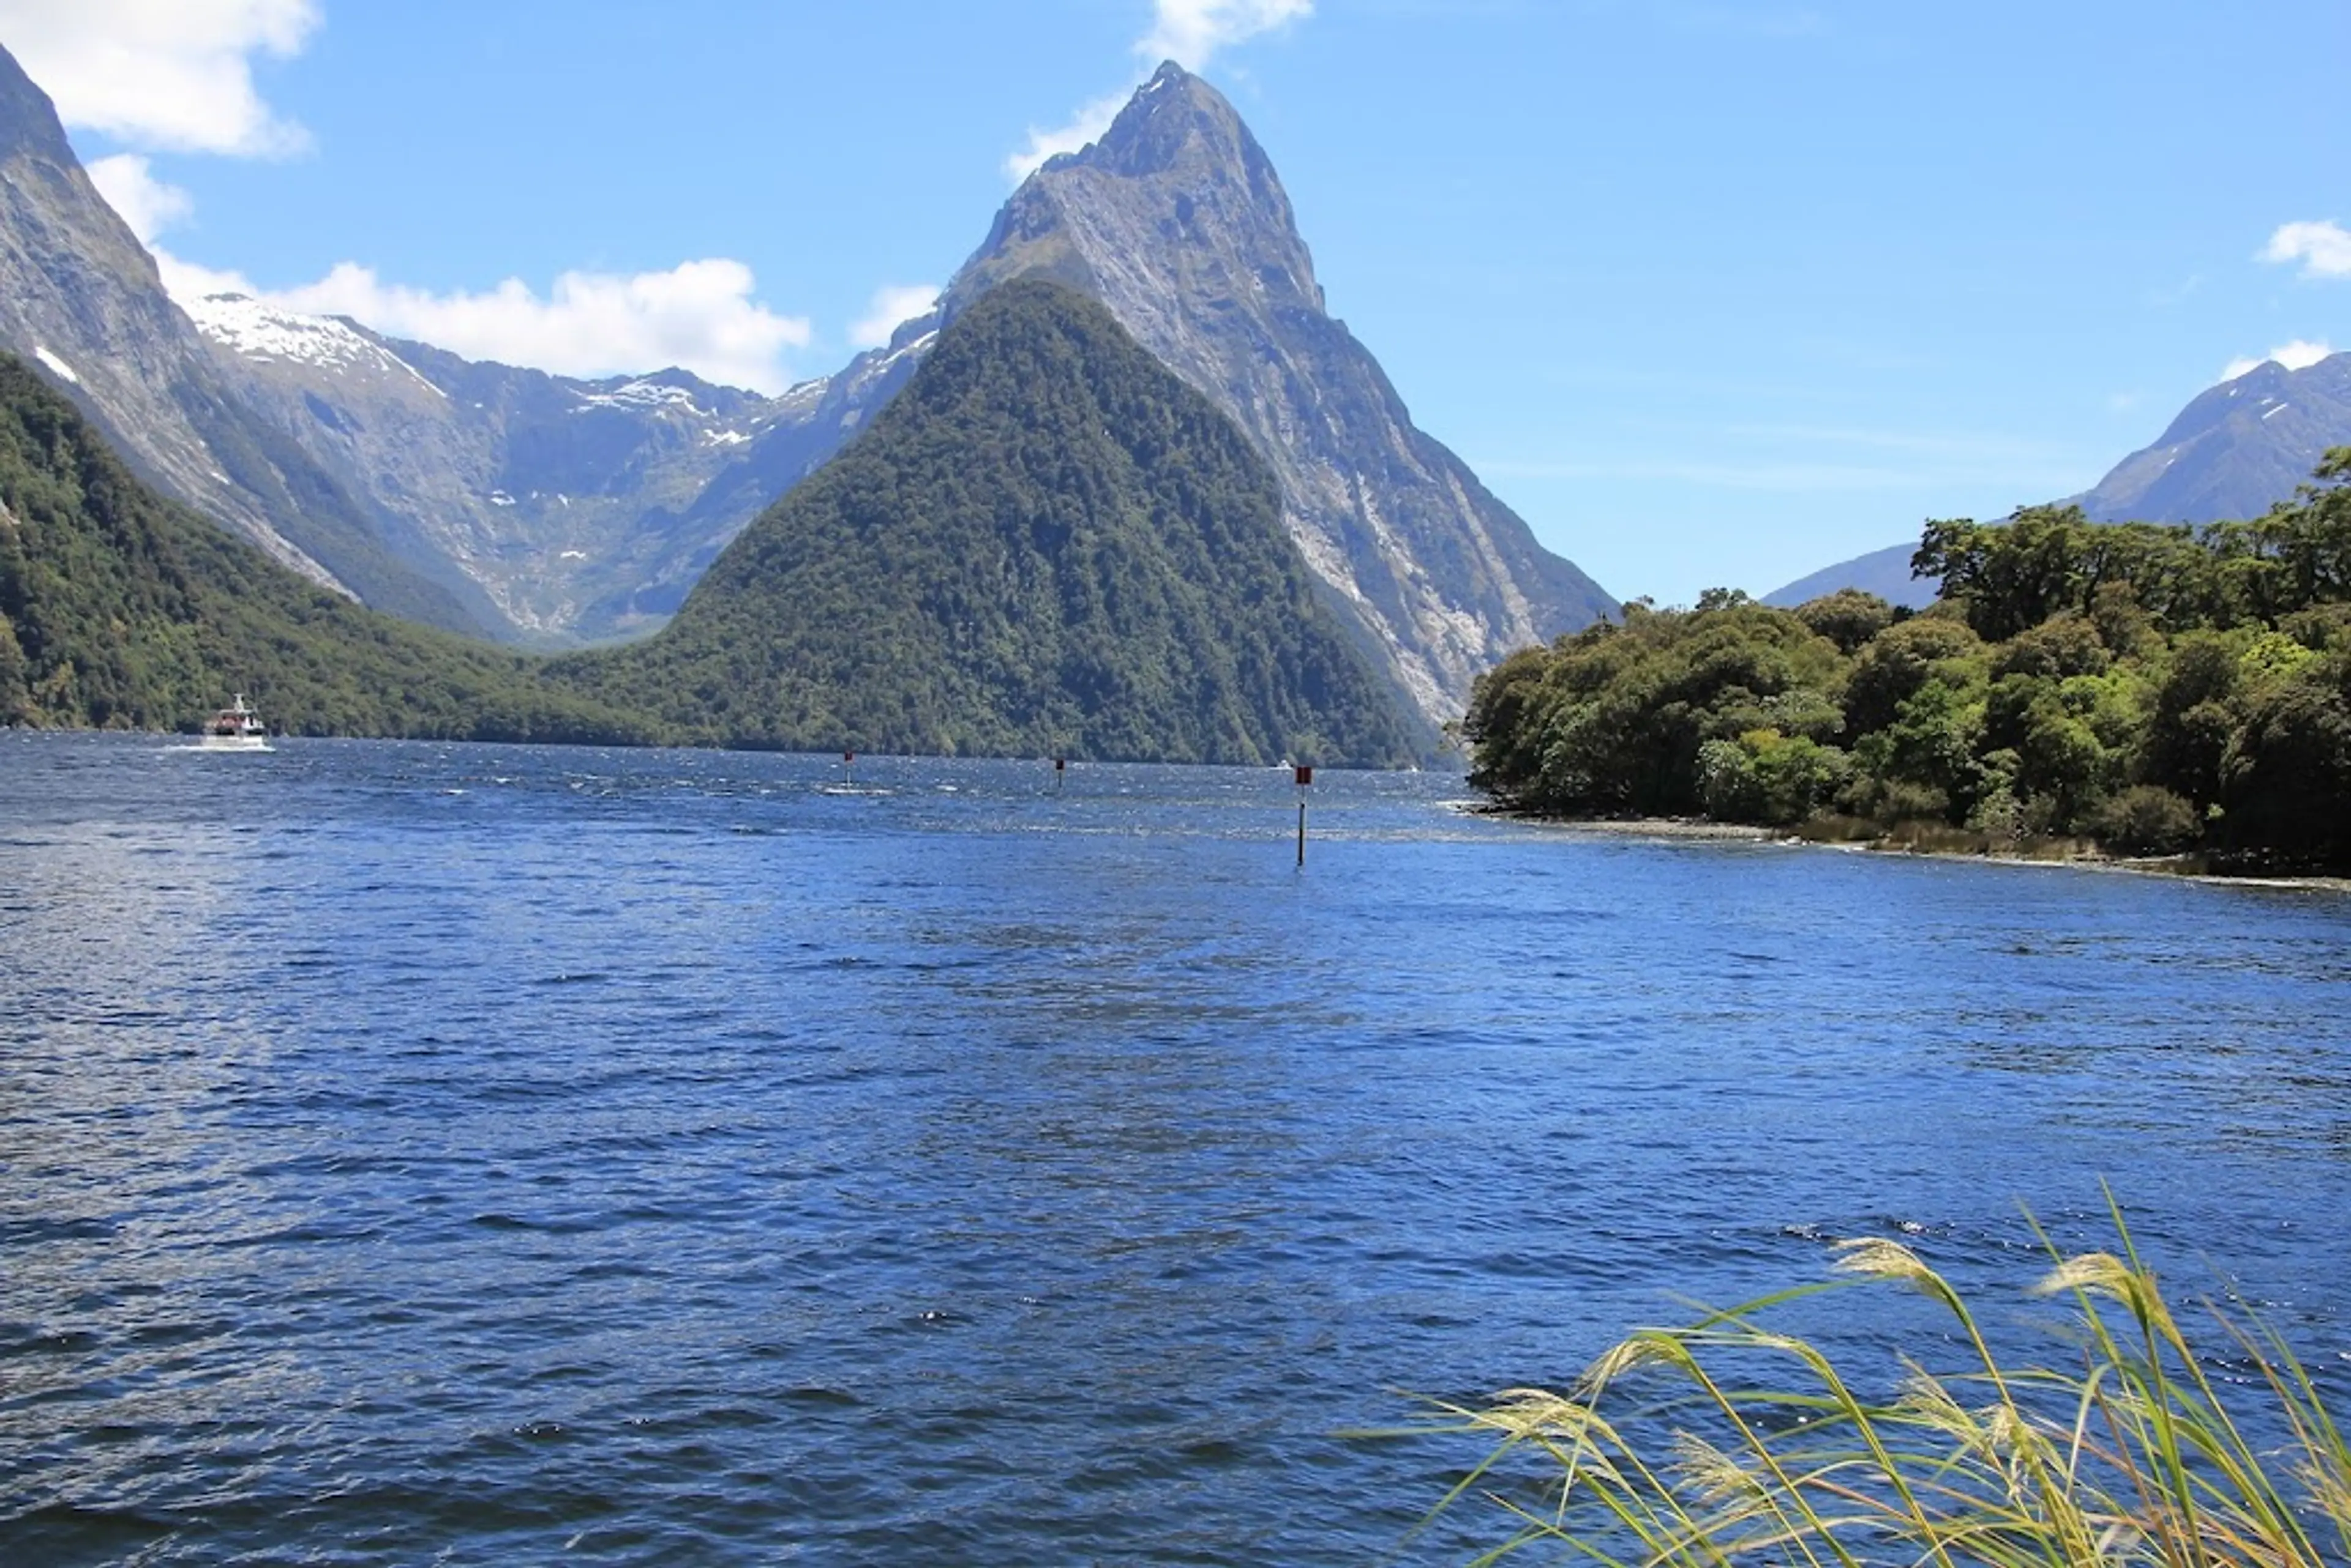 Scenic drive from Te Anau to Milford Sound